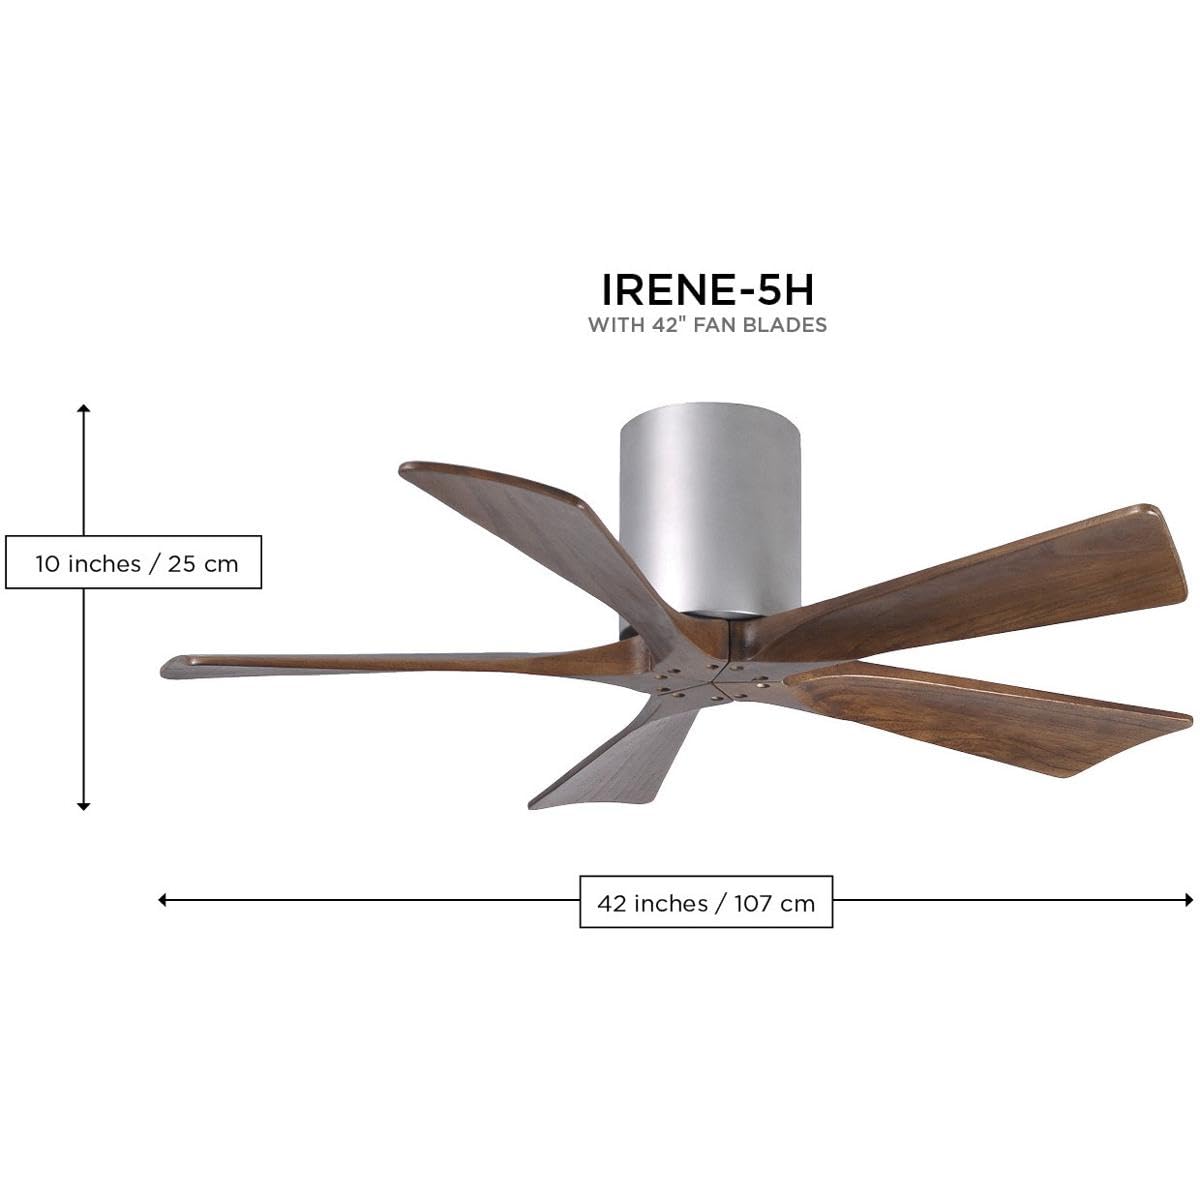 Matthews Fan IR5H-WH-BW-42 Irene-5H five-blade flush mount paddle fan in Gloss White finish with 42” solid barn wood tone blades. 